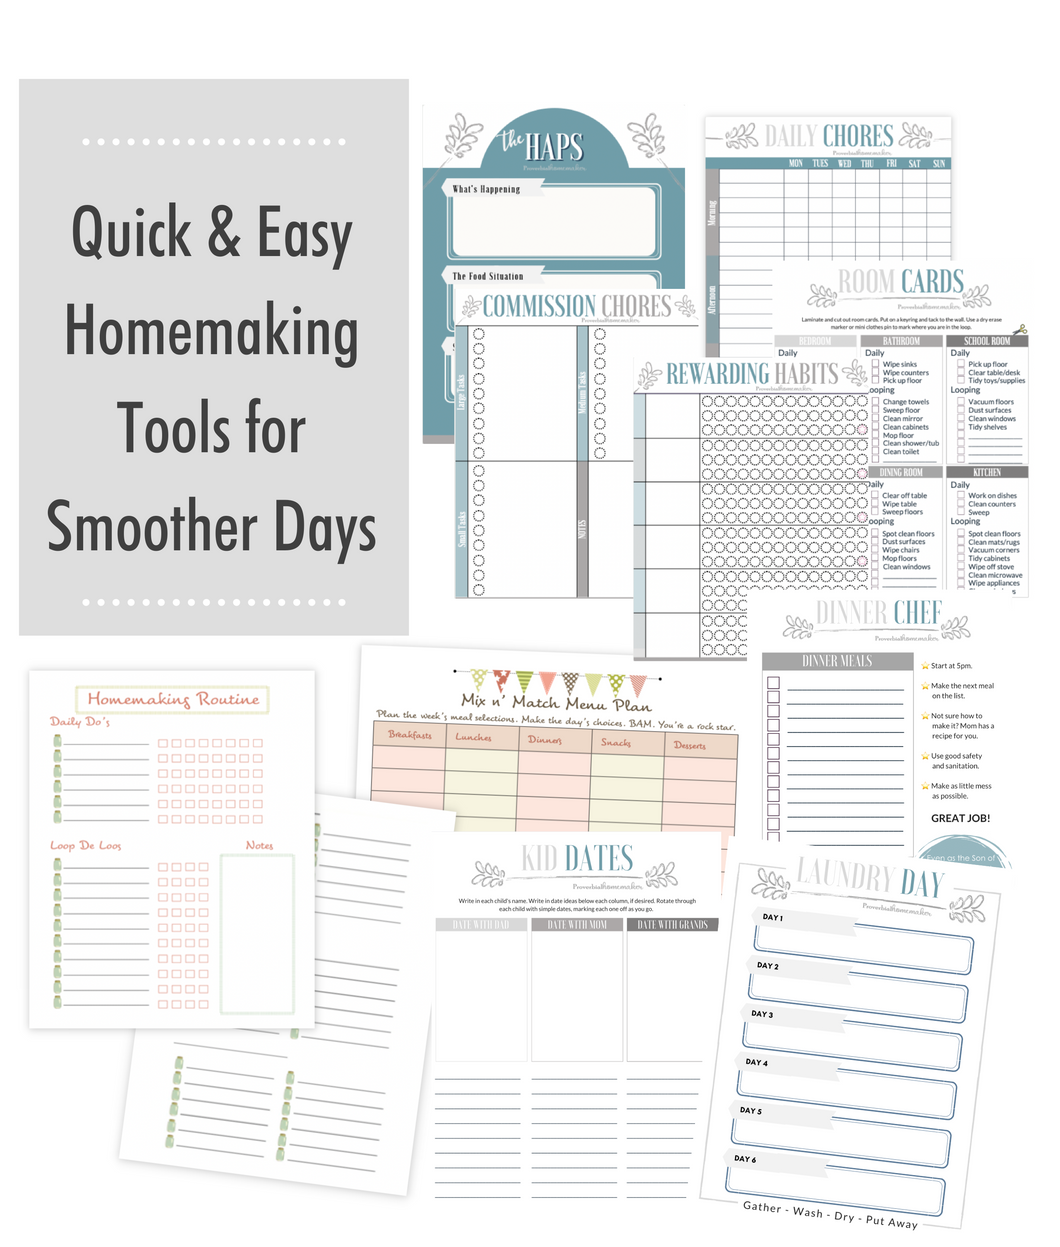 Quick & Easy Homemaking  Tools for Smoother Days